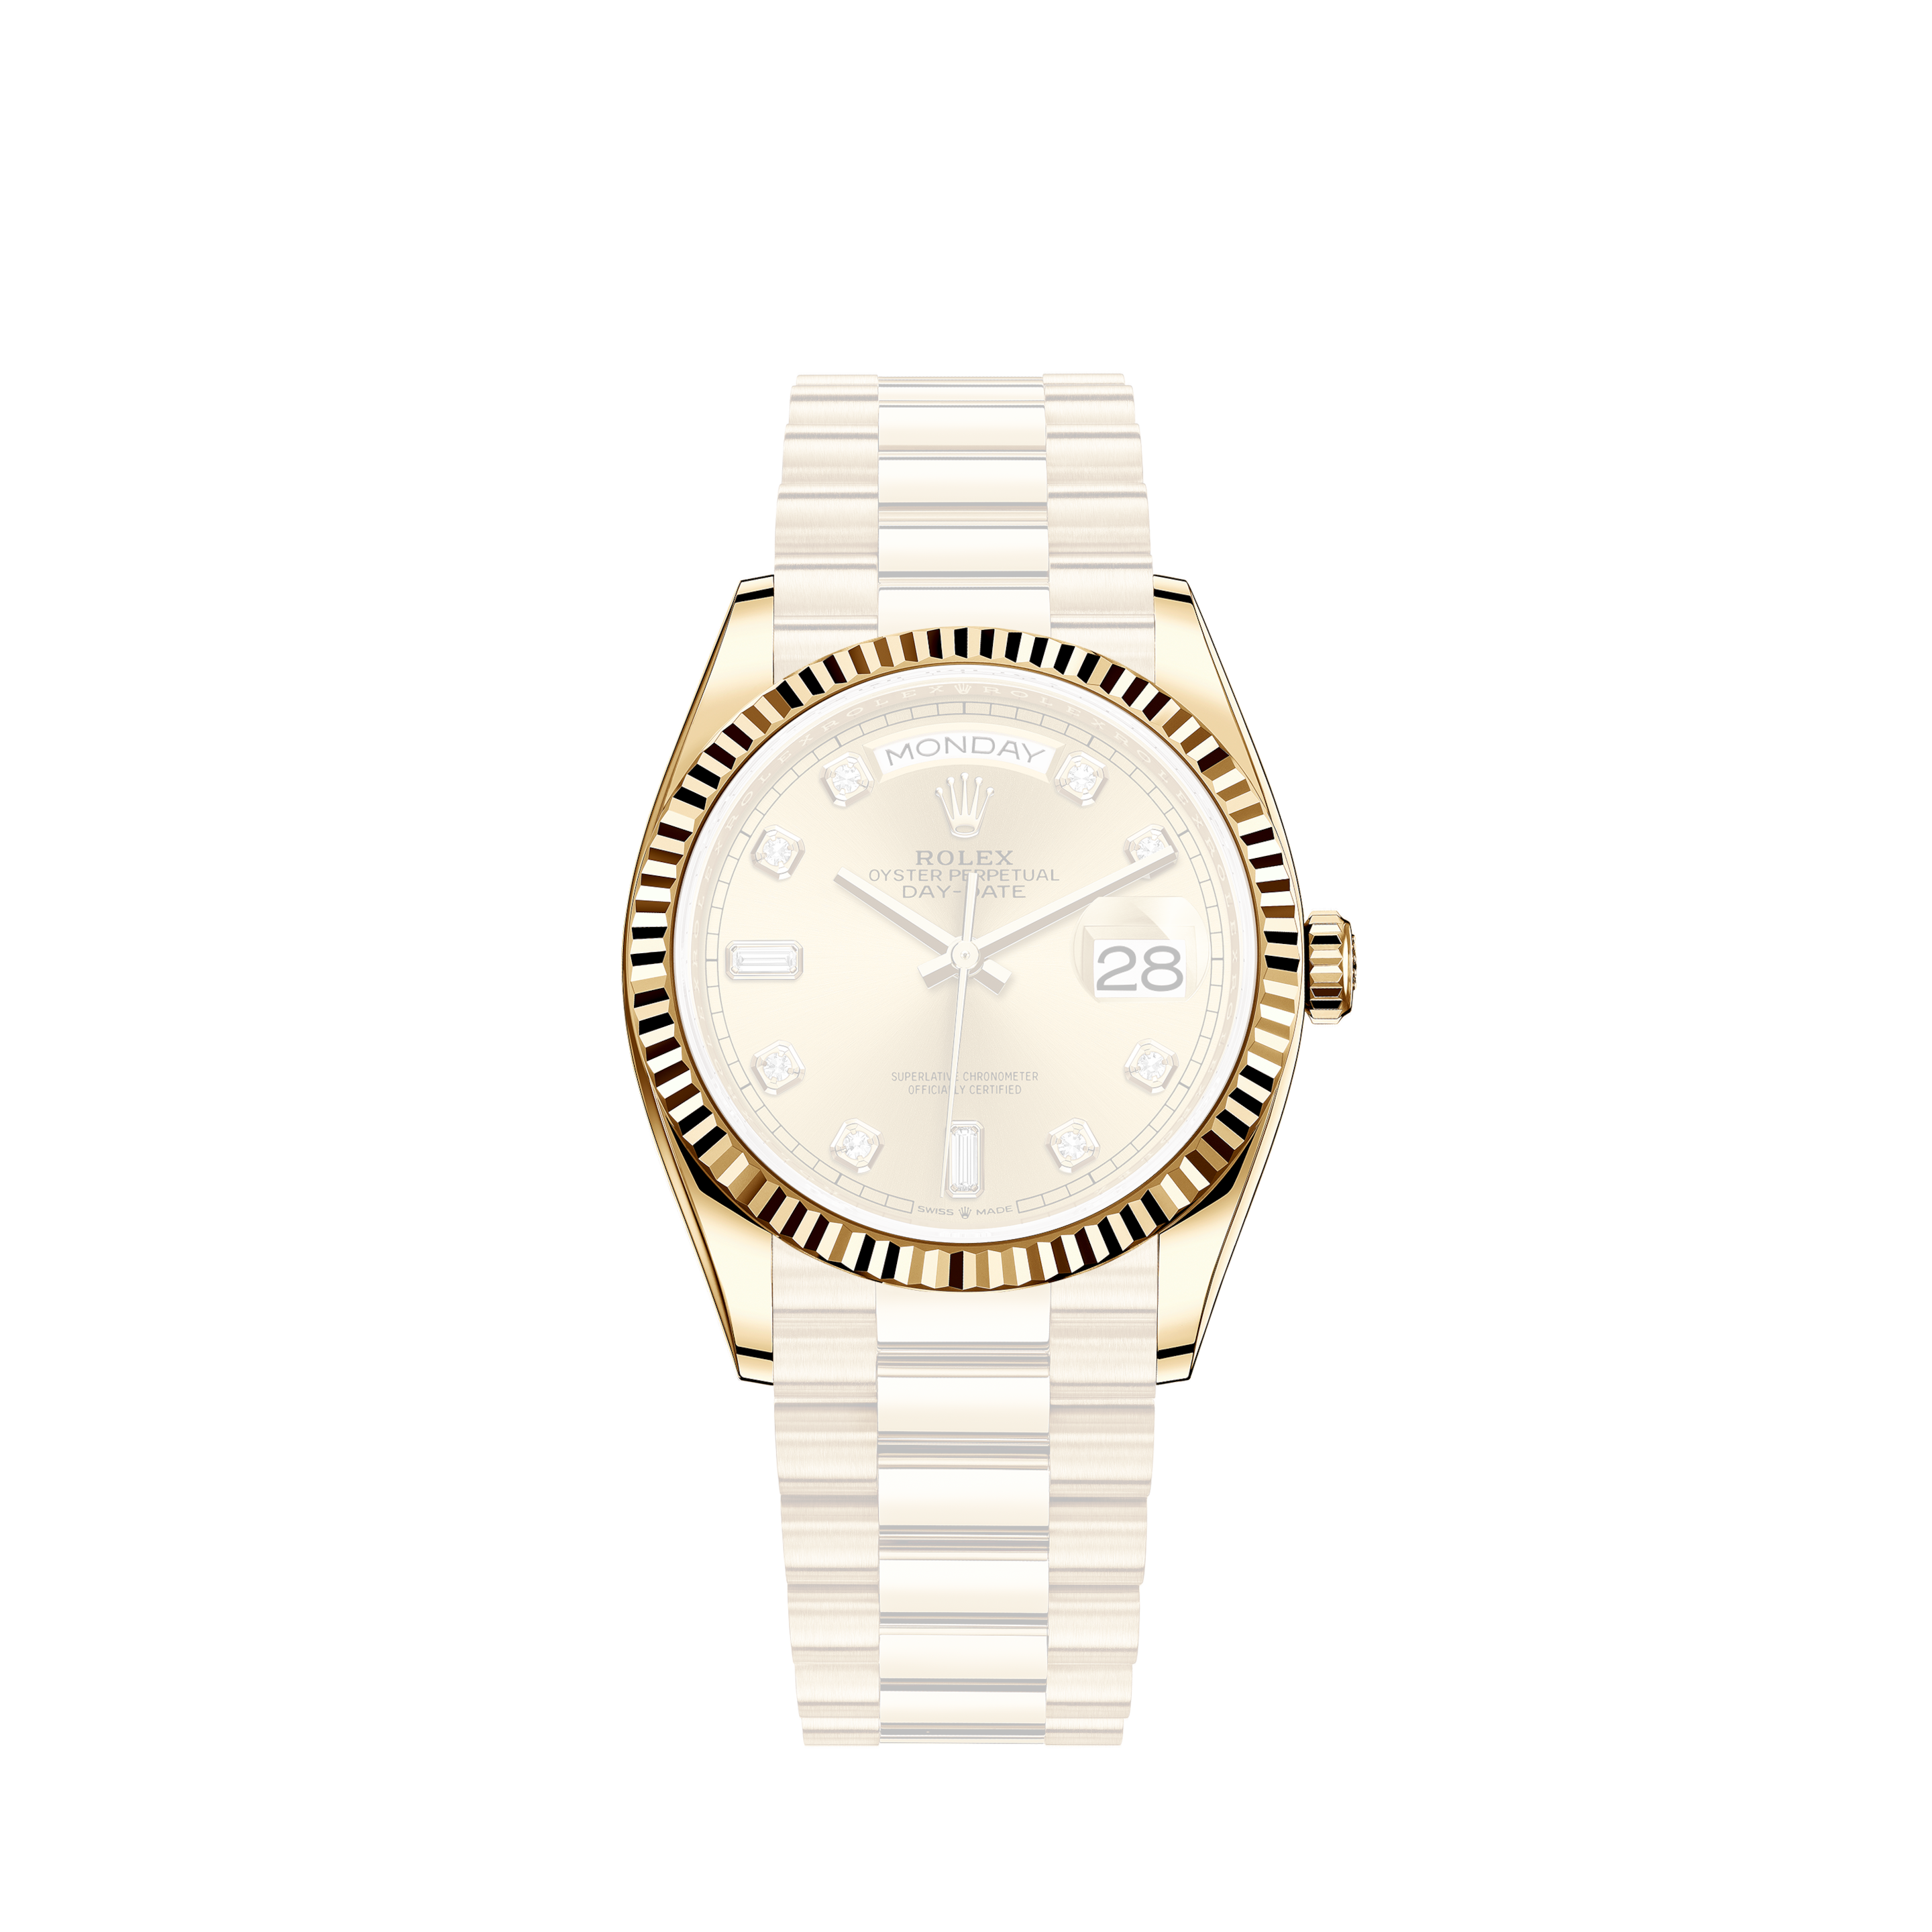 Rolex Datejust 26mm Steel Jubilee Diamond Watch with White Pearl Dial